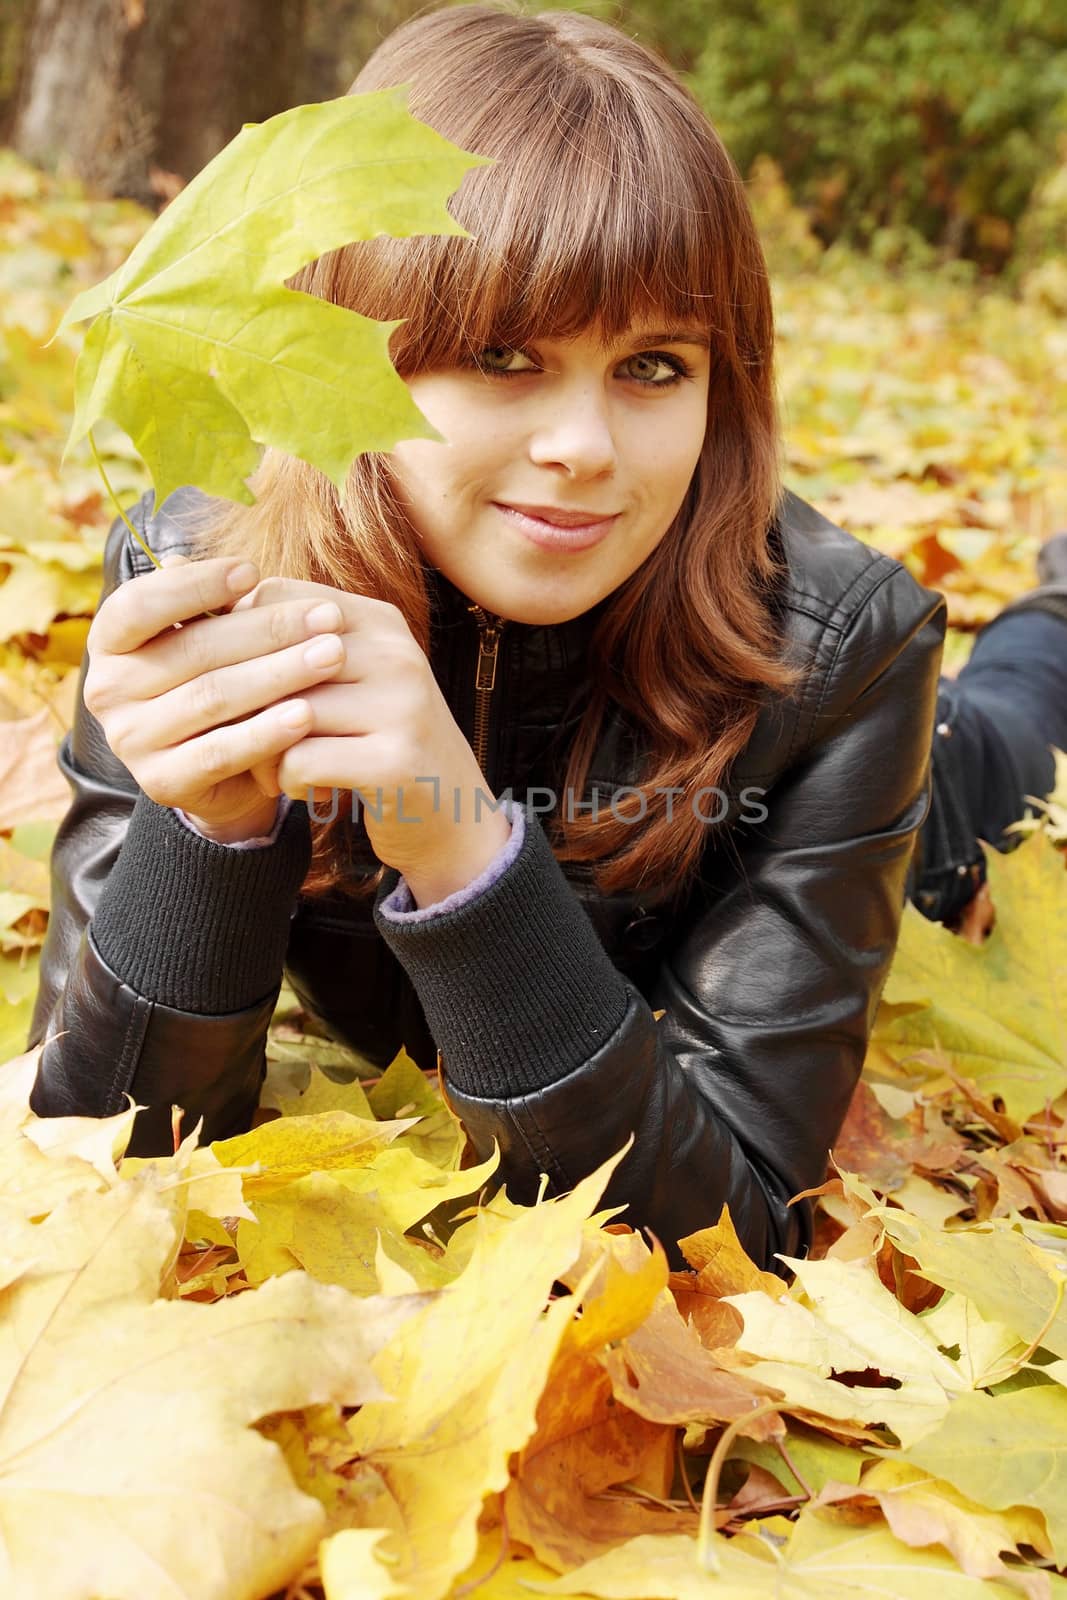 portrait of a girl lying on autumn leaves